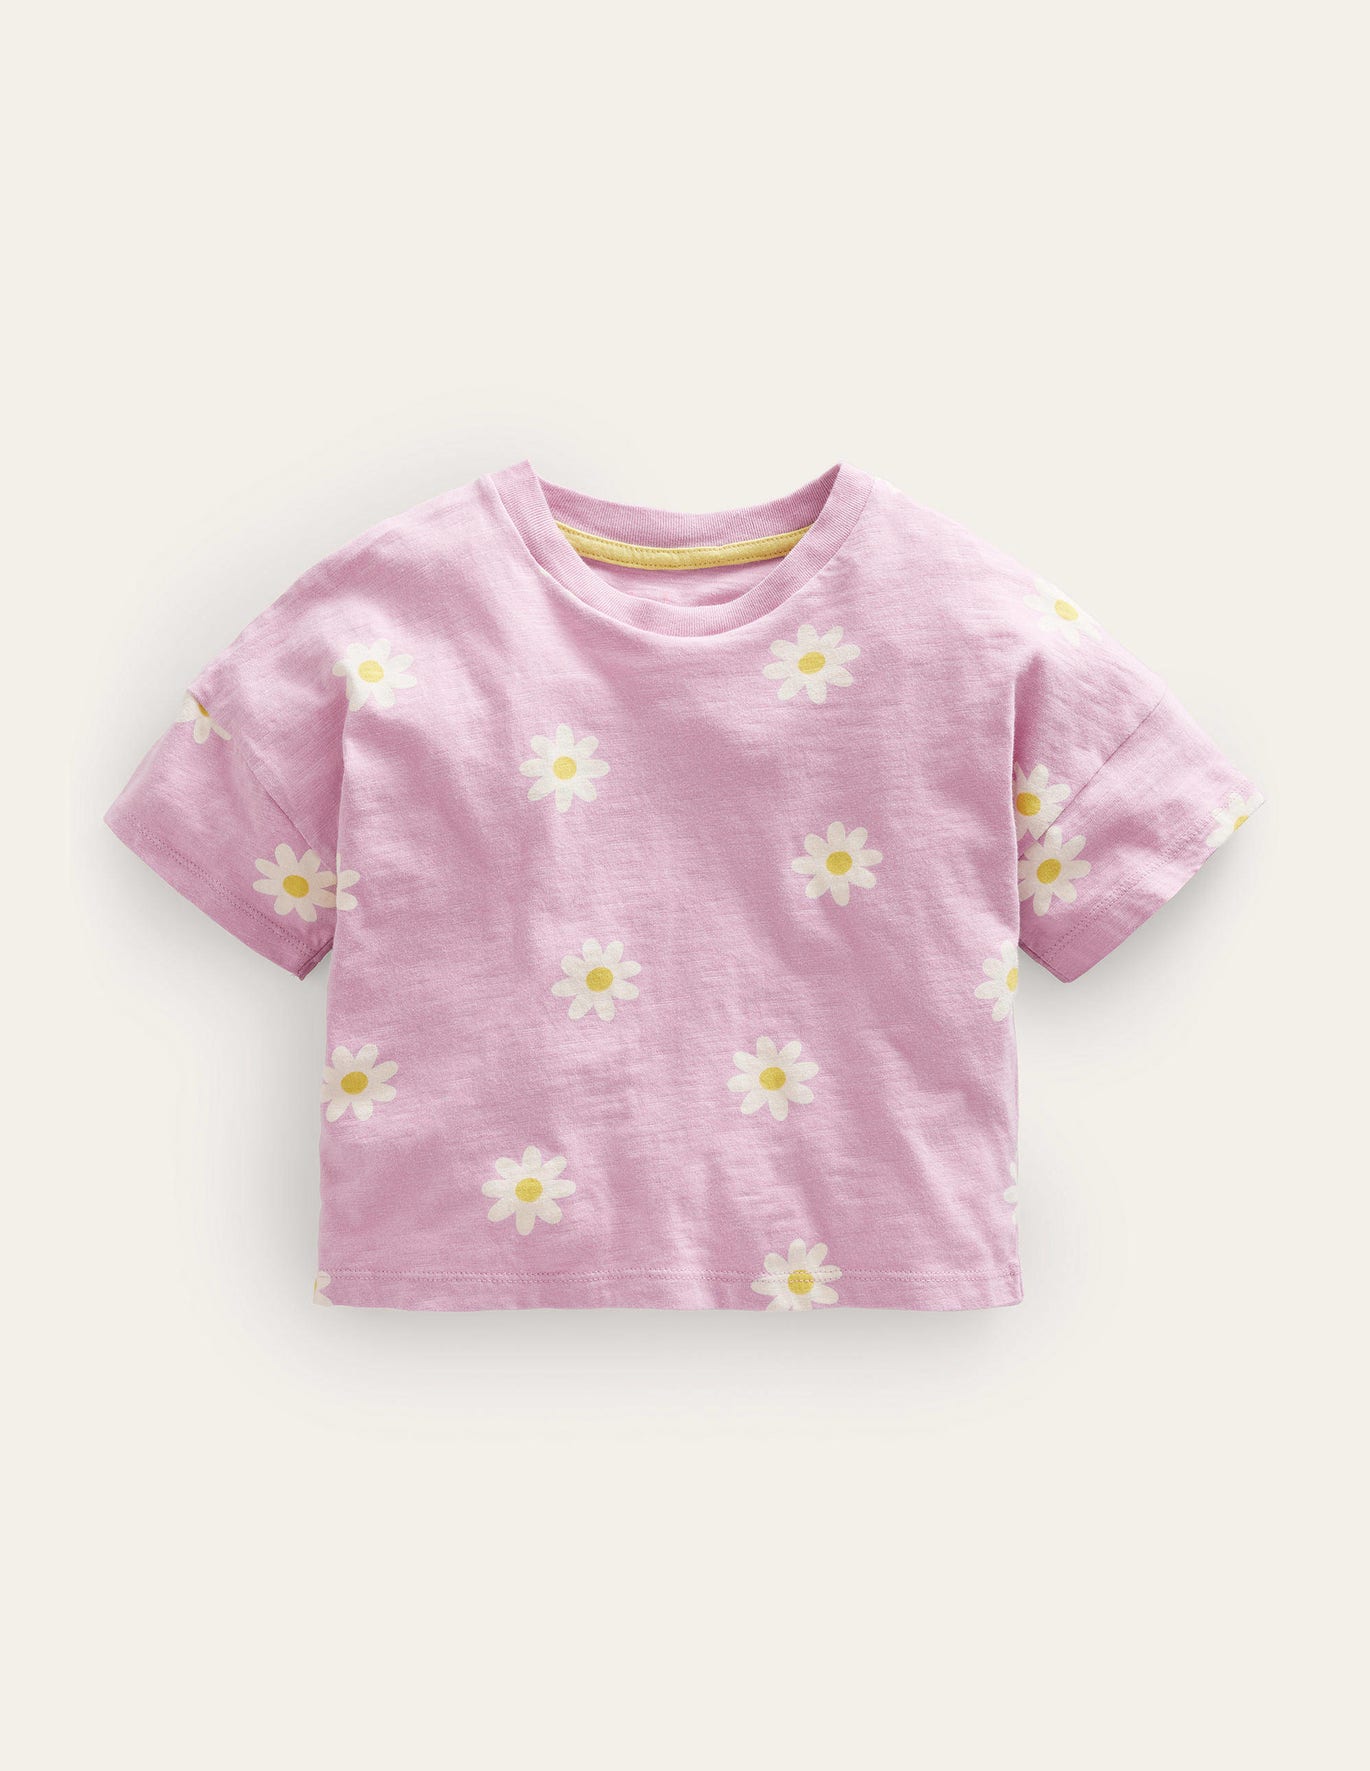 Boden Relaxed T-shirt - Soft Lavender Daisies